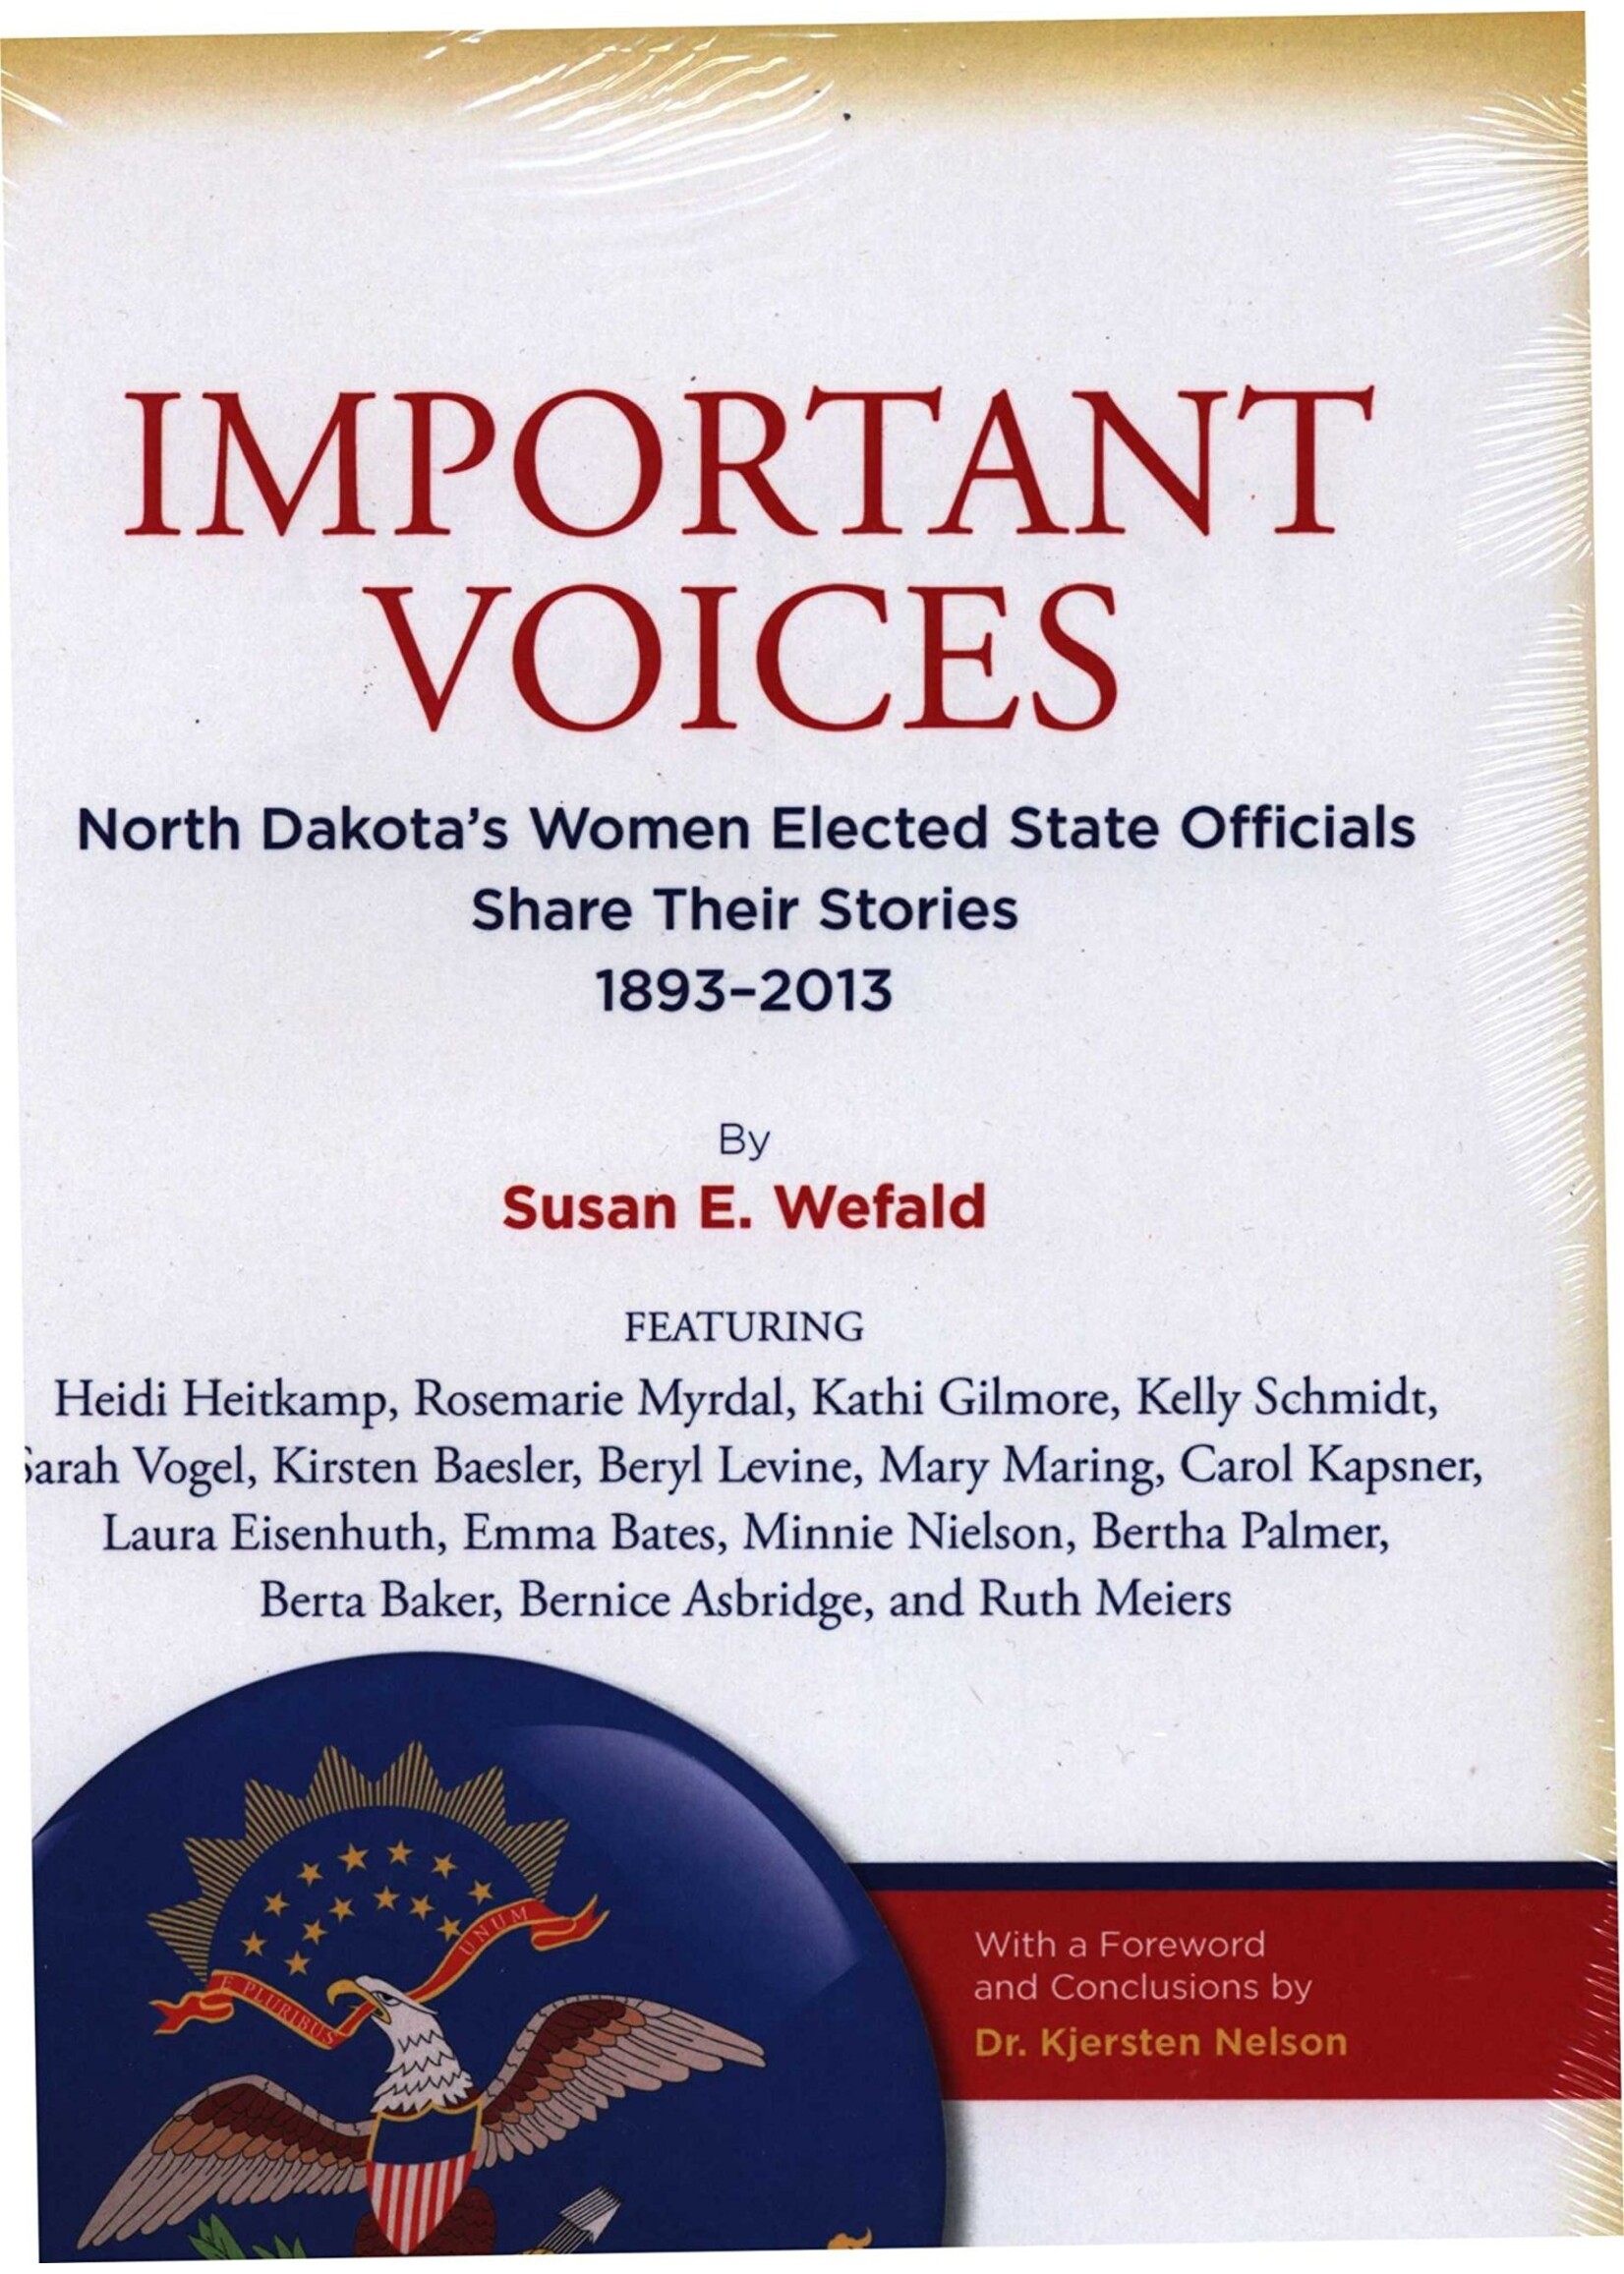 Important Voices: North Dakota's Women Elected State Officials Share Their Stories 1893-2013